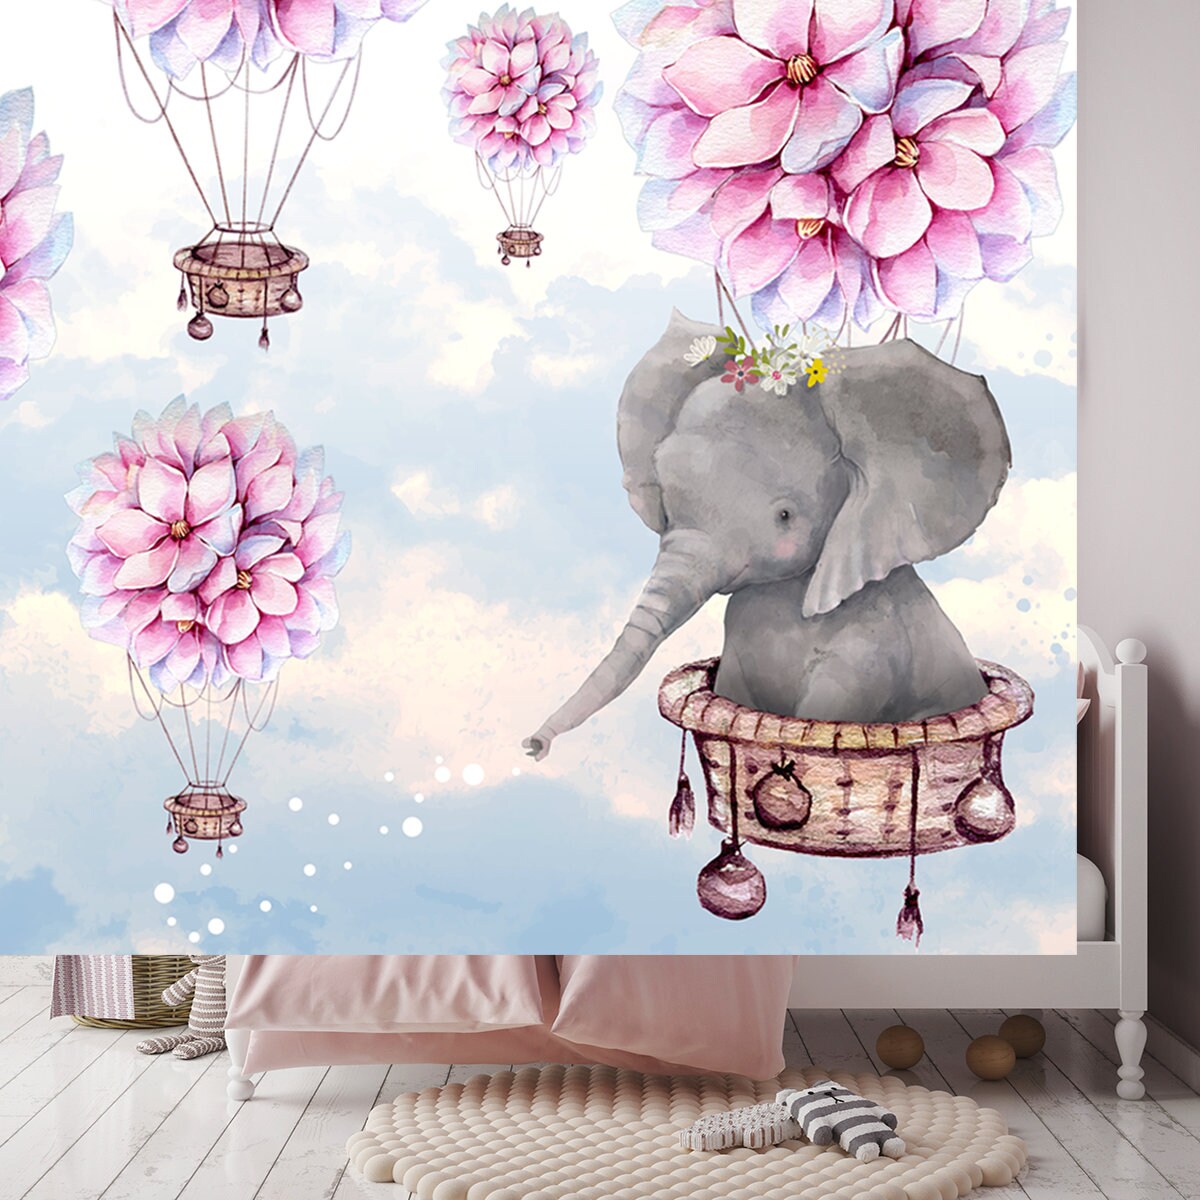 Big Elephant with Hot Air Balloon Flowers on Sky Watercolor Wallpaper Girls Bedroom Mural